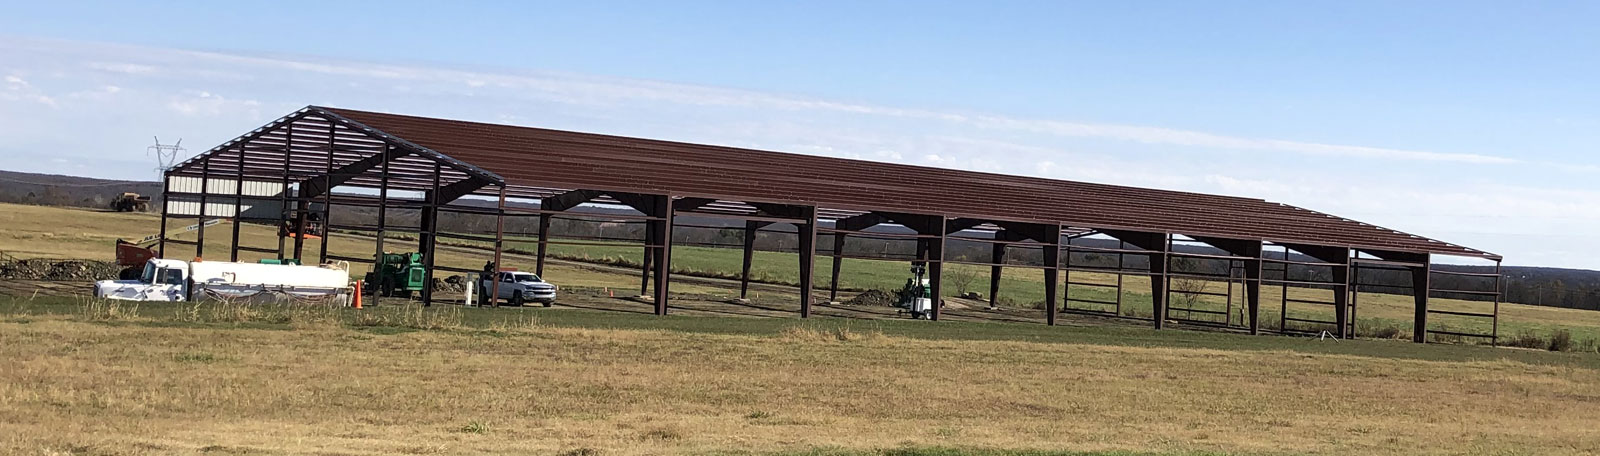 Ranch & Golf Covered Arena Builders